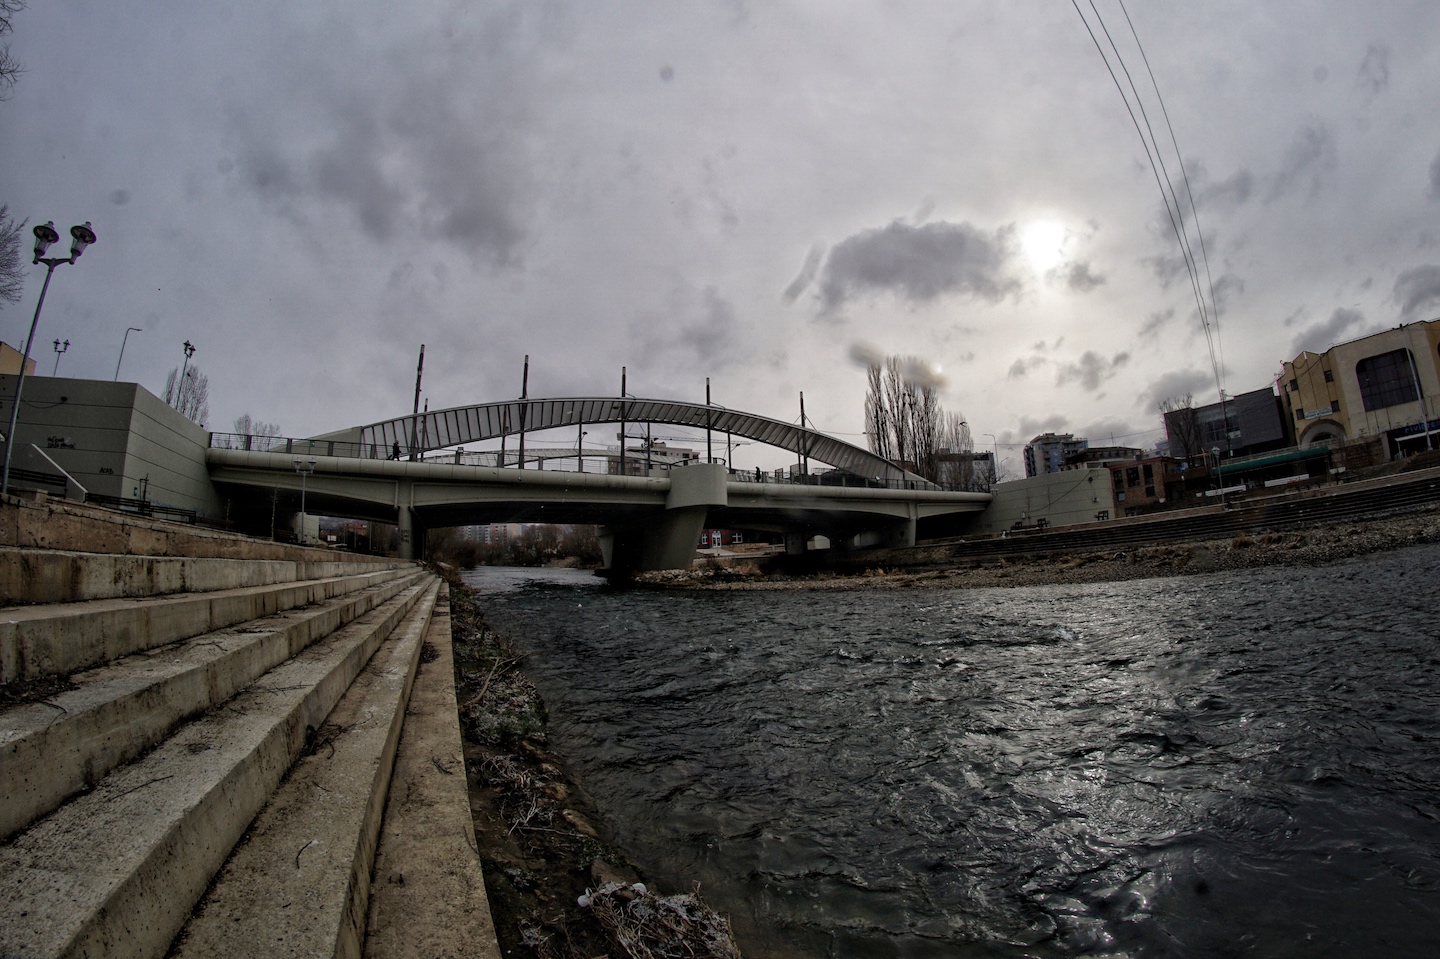 1562778590245-A-view-of-the-main-bridge-where-most-incidents-take-place-from-the-bank-of-Ibar-river-The-bridge-is-under-24h-protection-by-Kfor-or-Kosovo-police